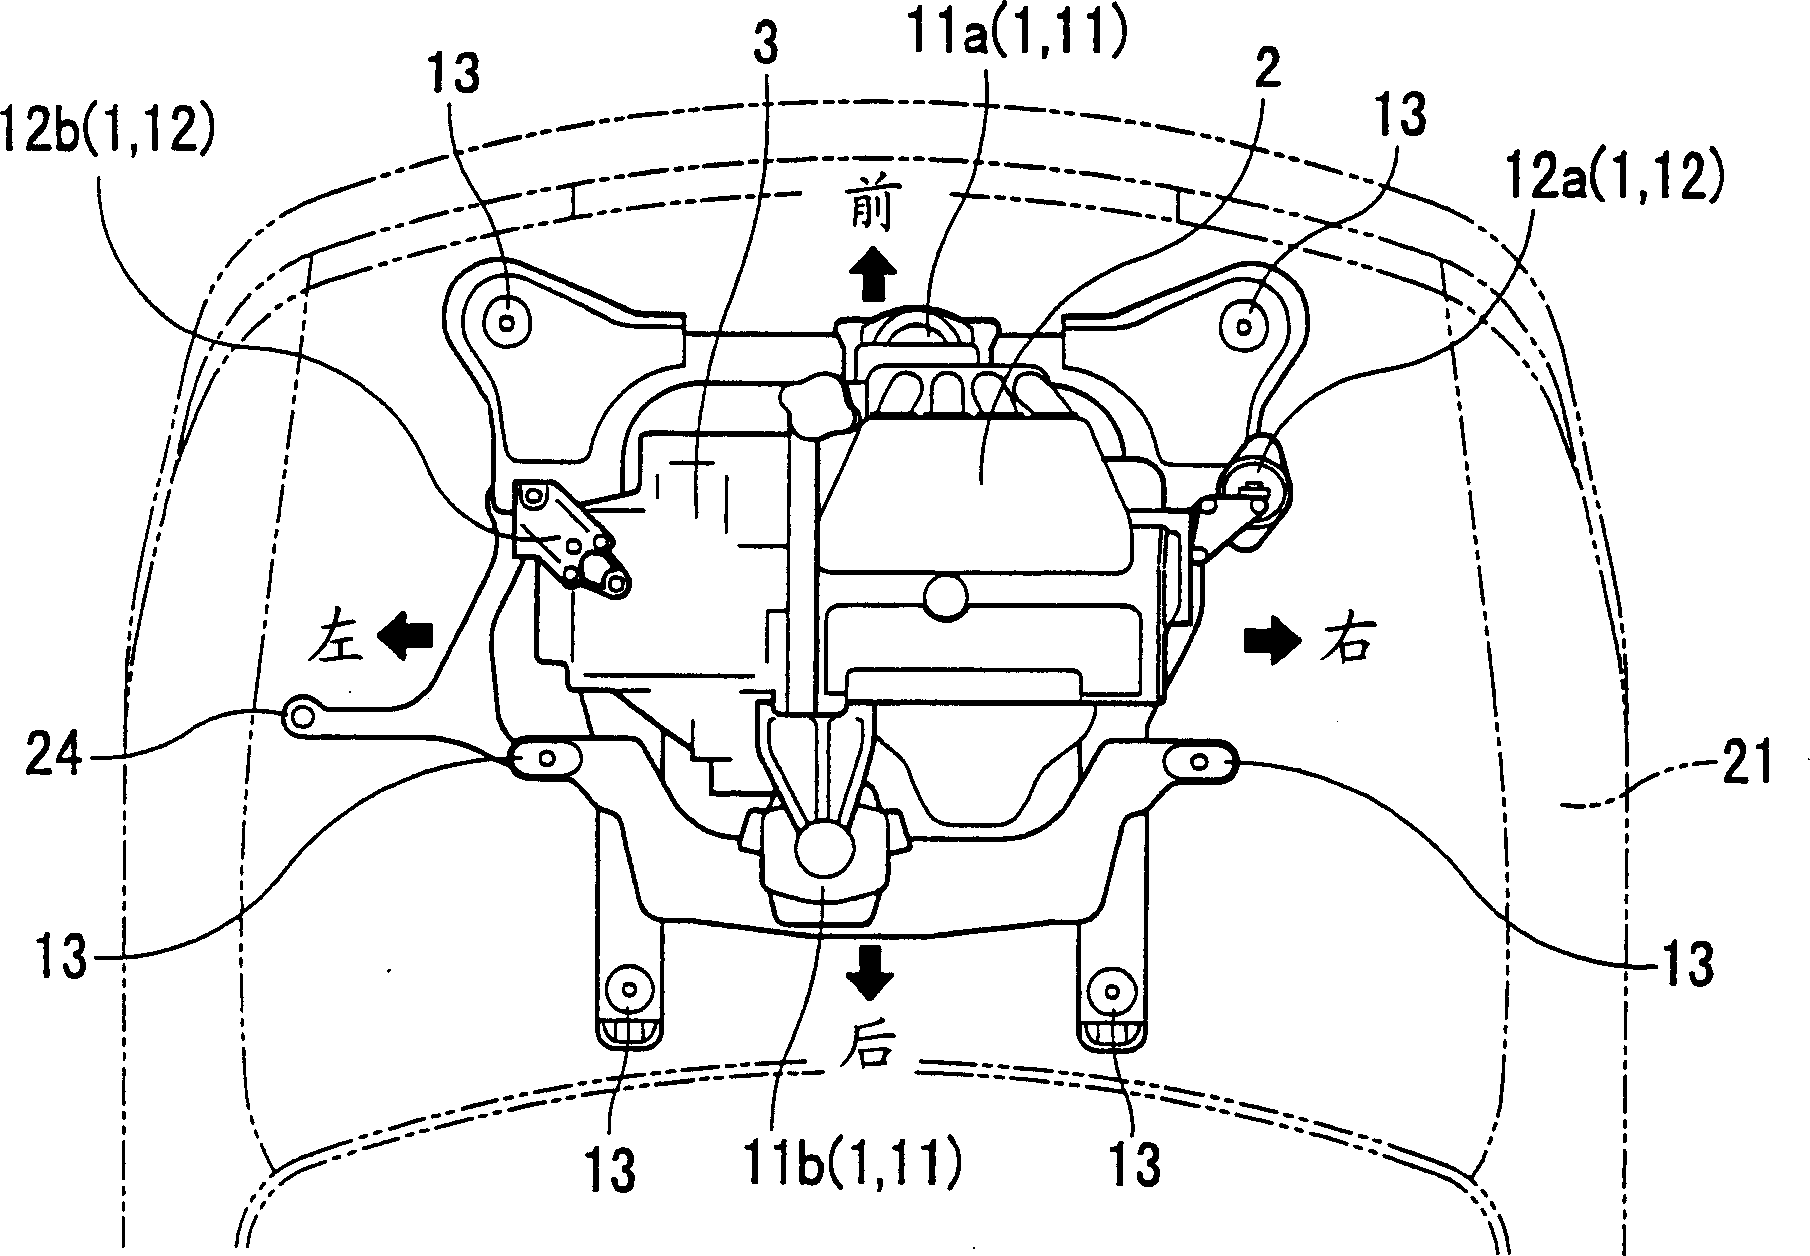 Supporting structure for vehicle power source